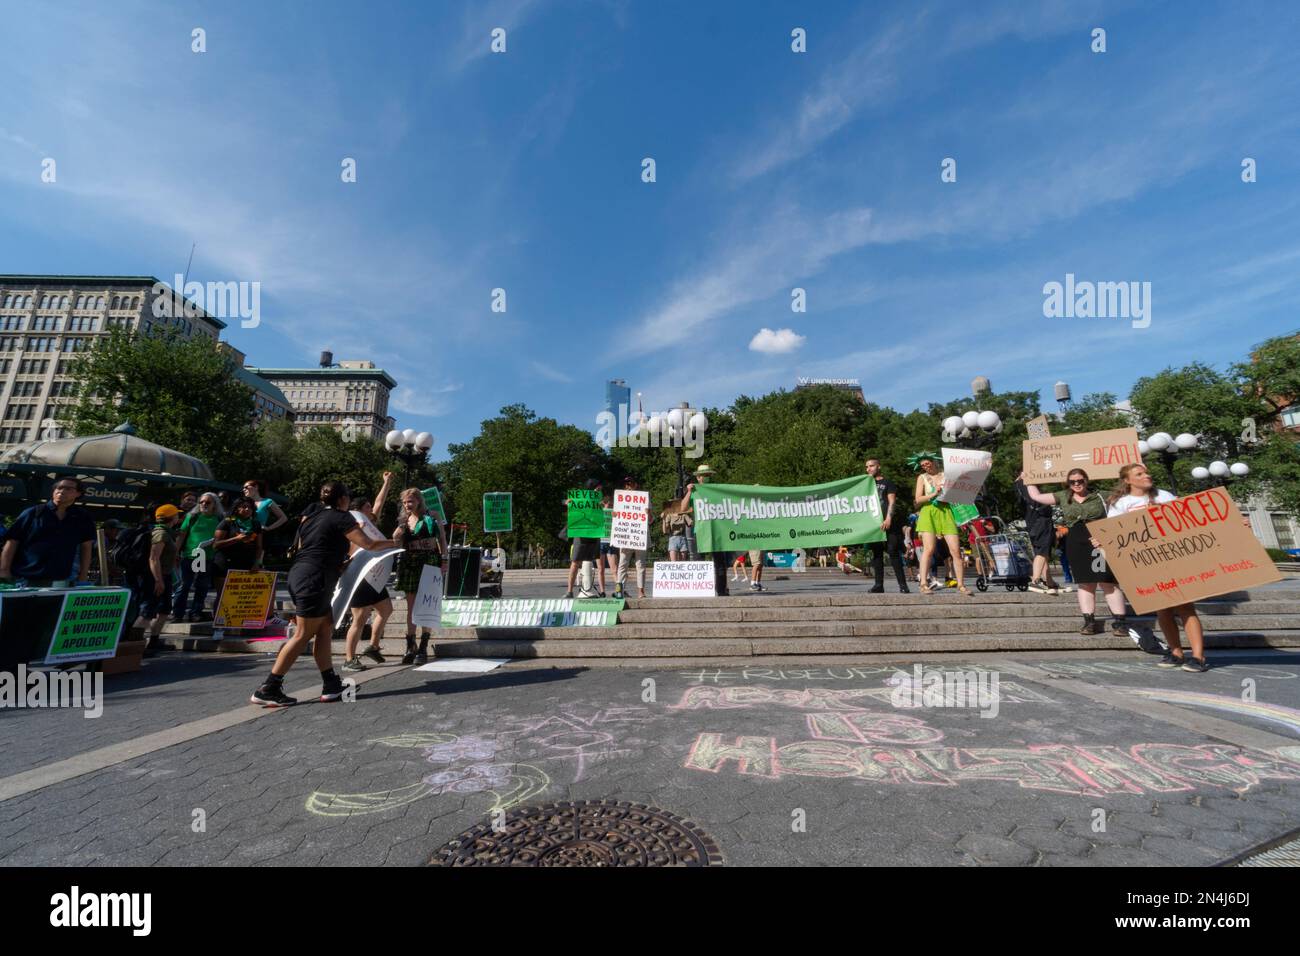 NEW YORK, NEW YORK - JULY 13: 'Rise Up 4 Abortion Rights' activists gather and protest at Union Square on July 13, 2022 in New York City. Abortion rig Stock Photo